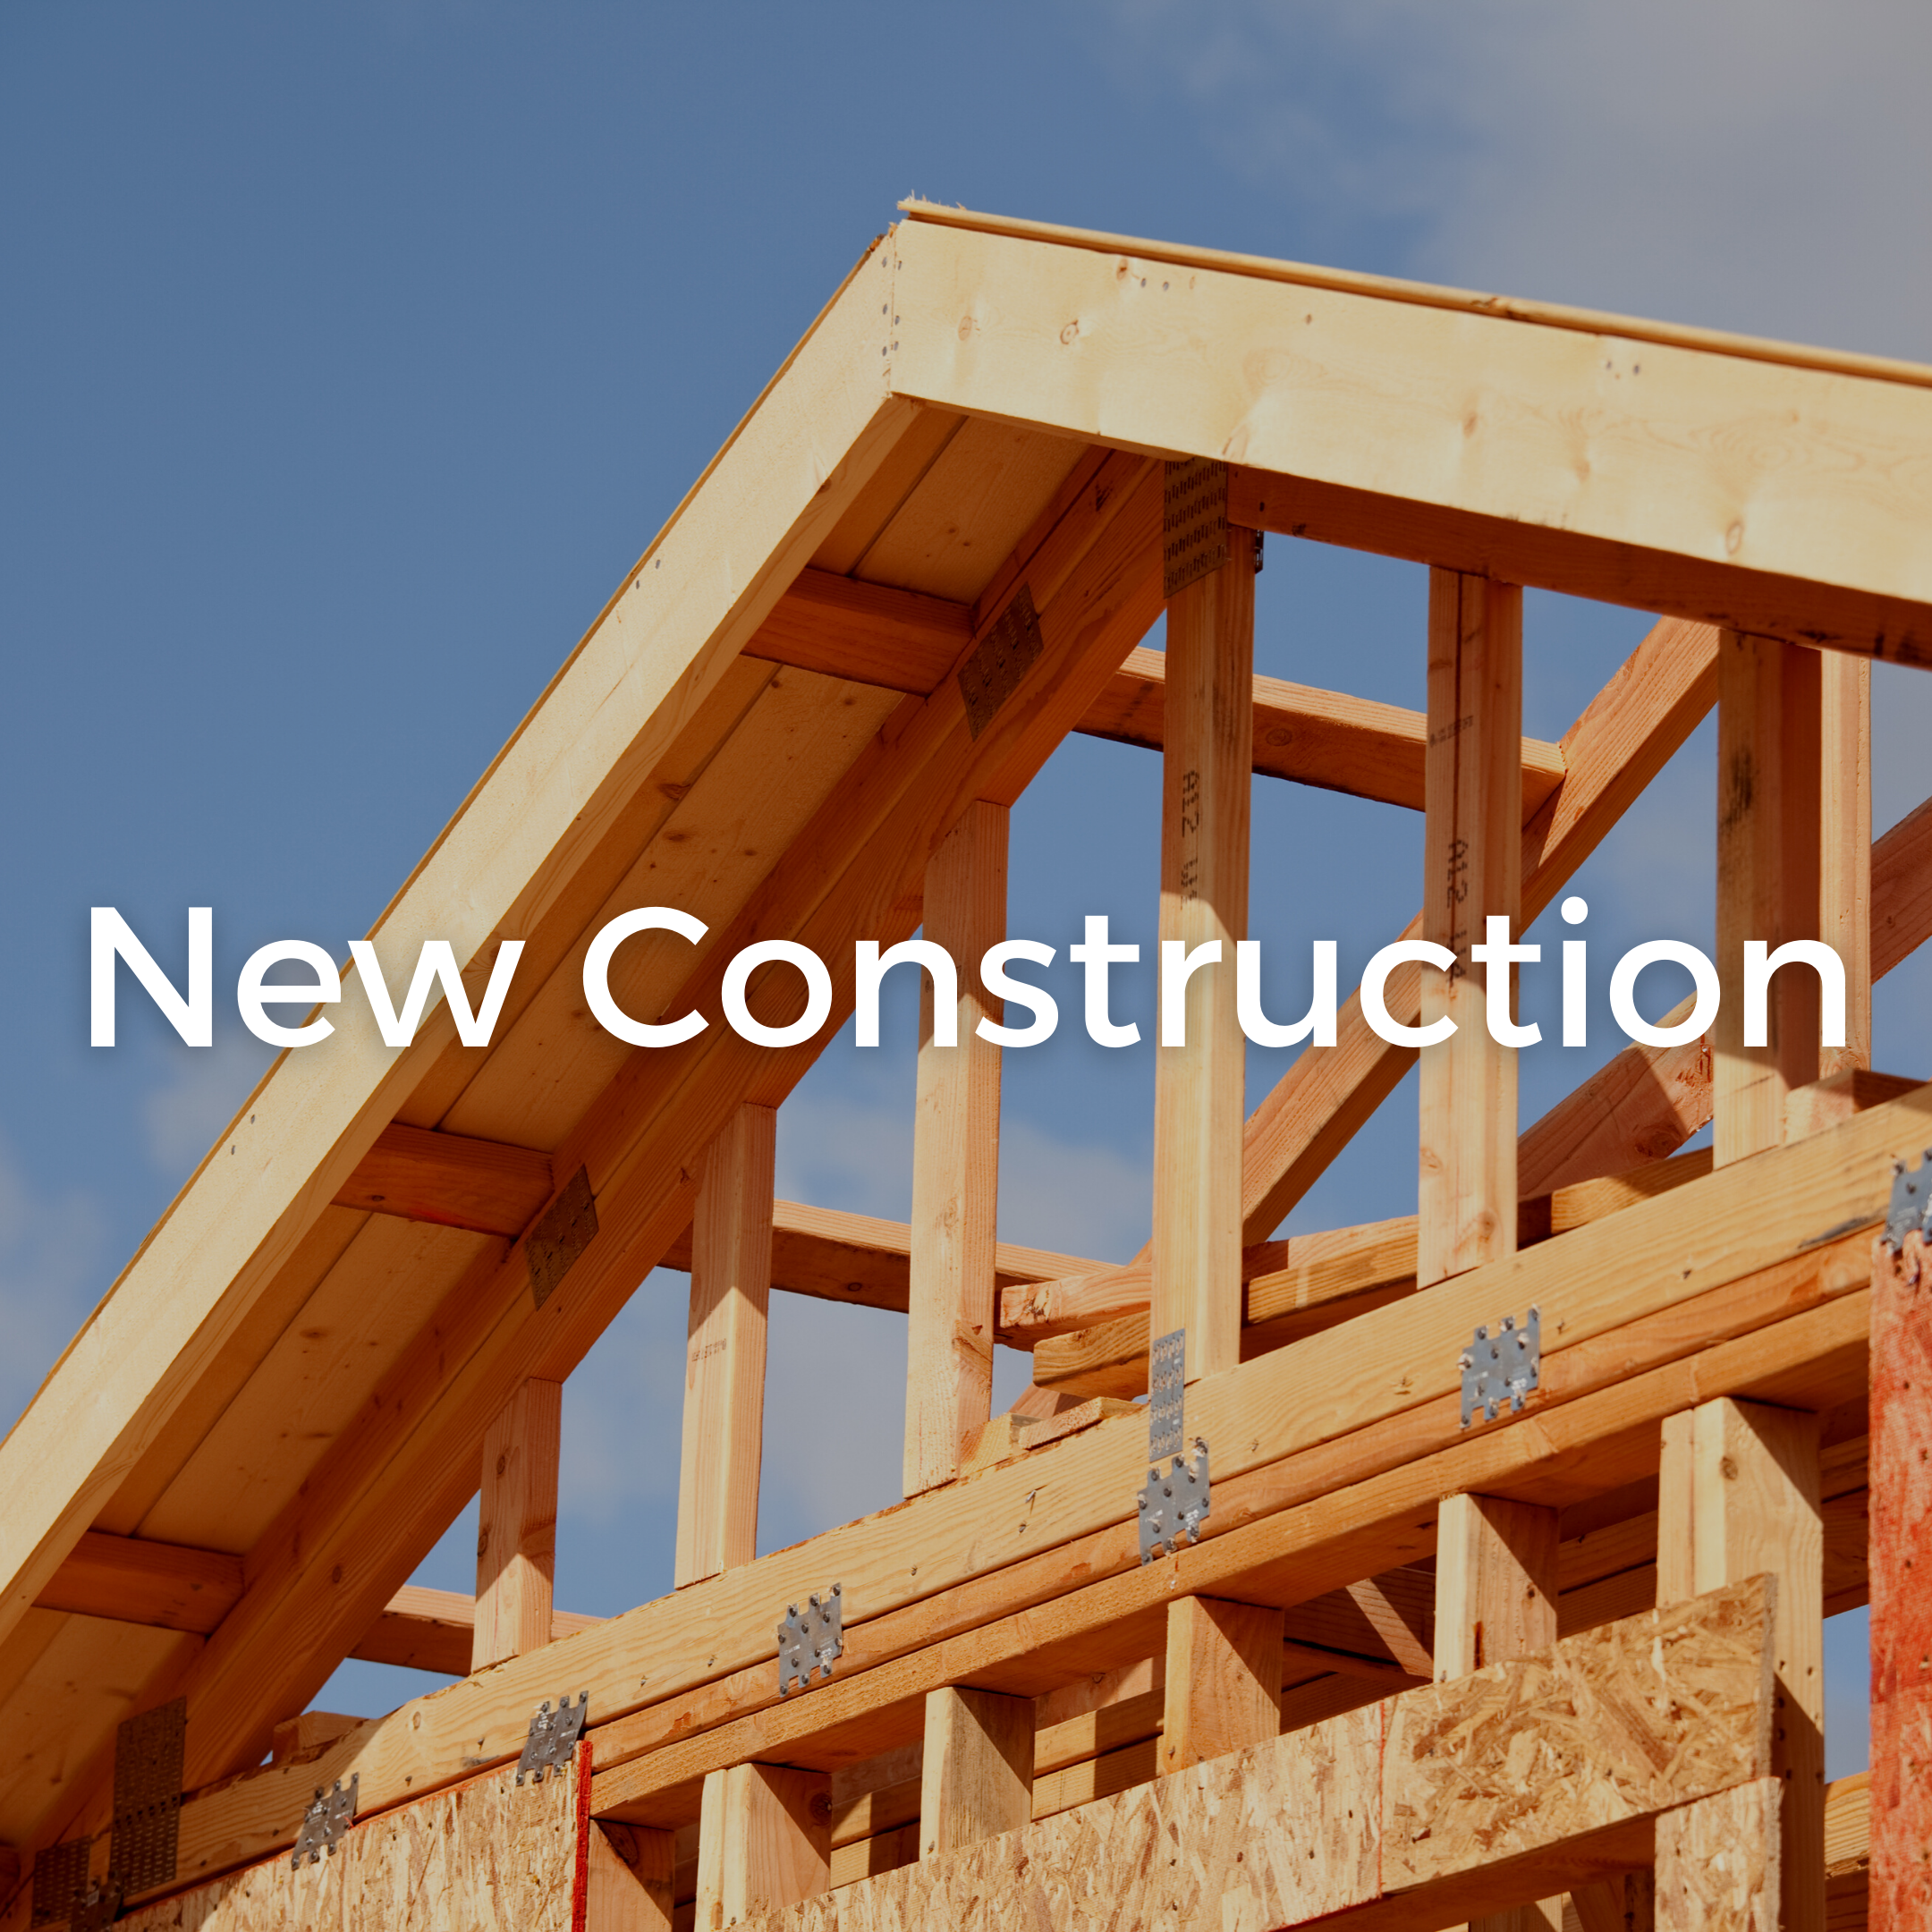 Windermere Whidbey Real Estate | New Construction